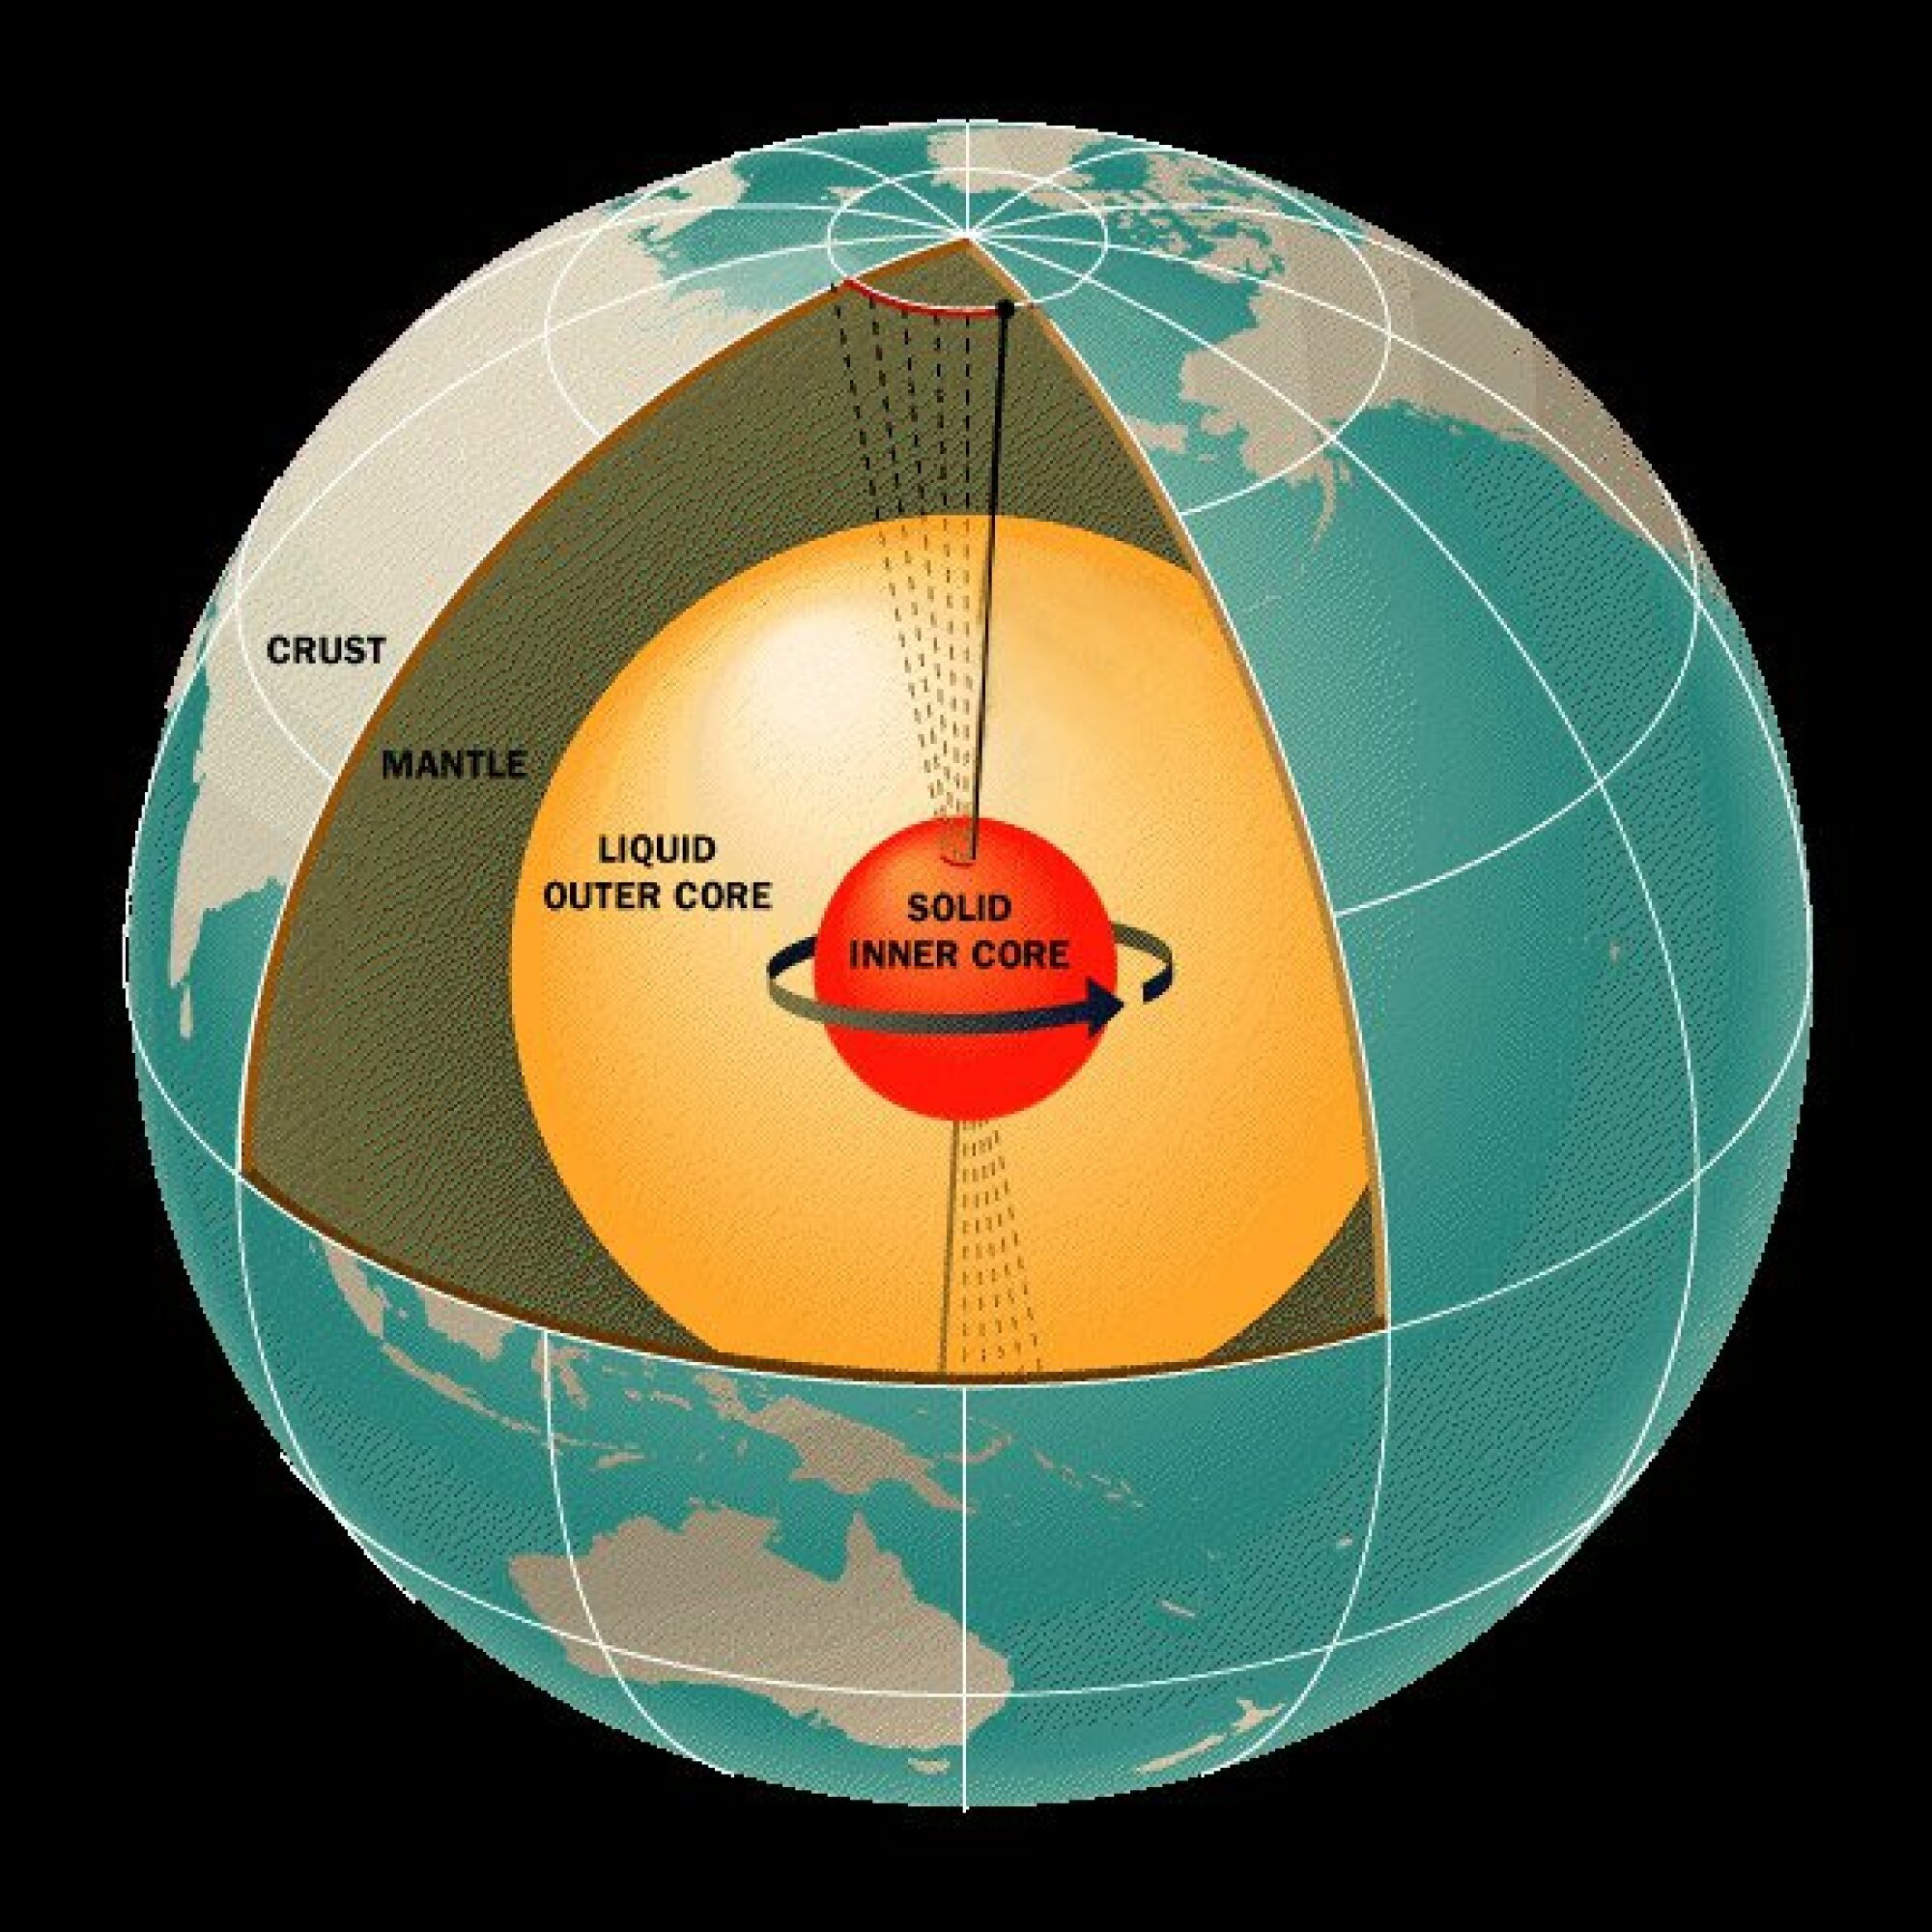 Earth's layers: At center is the solid metal core, surrounded by a fluid outer core, then the mantle, then the crust.